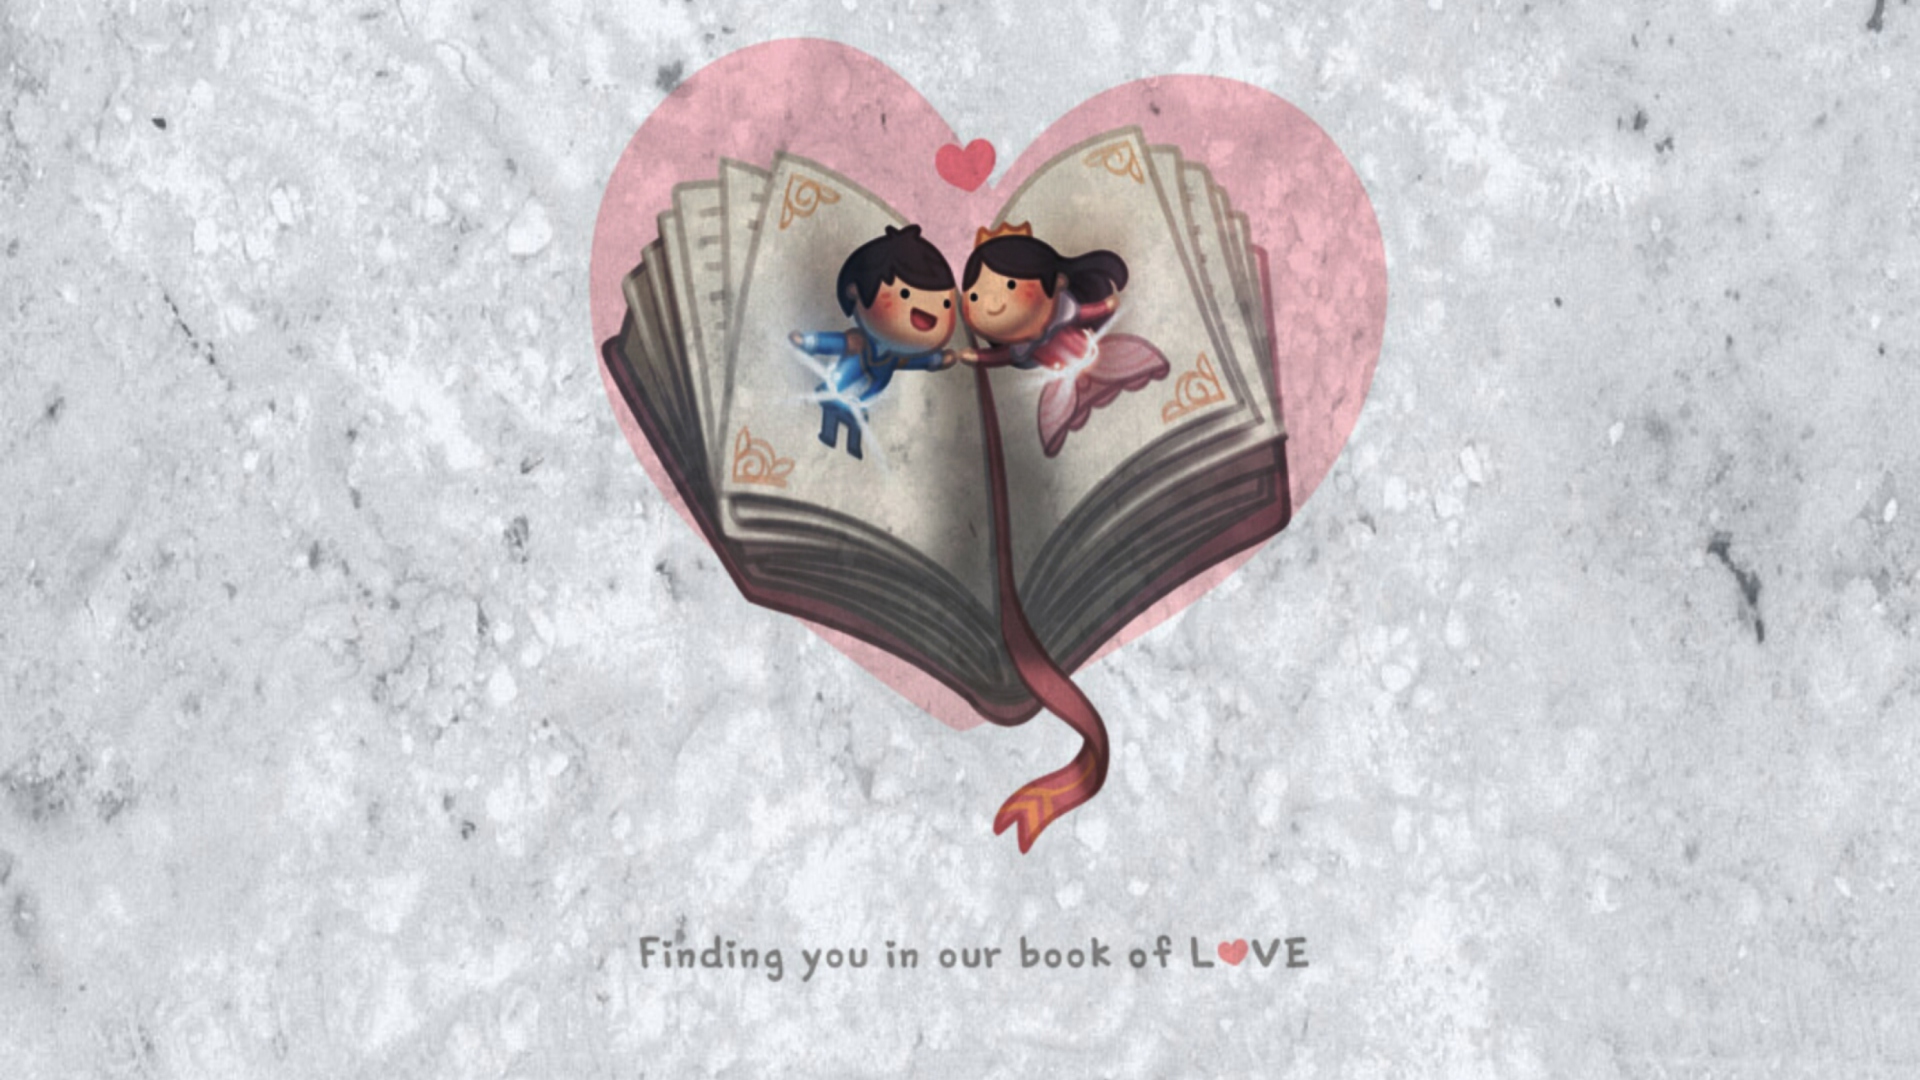 Love Is Finding You In Our Book Of Love wallpaper 1920x1080